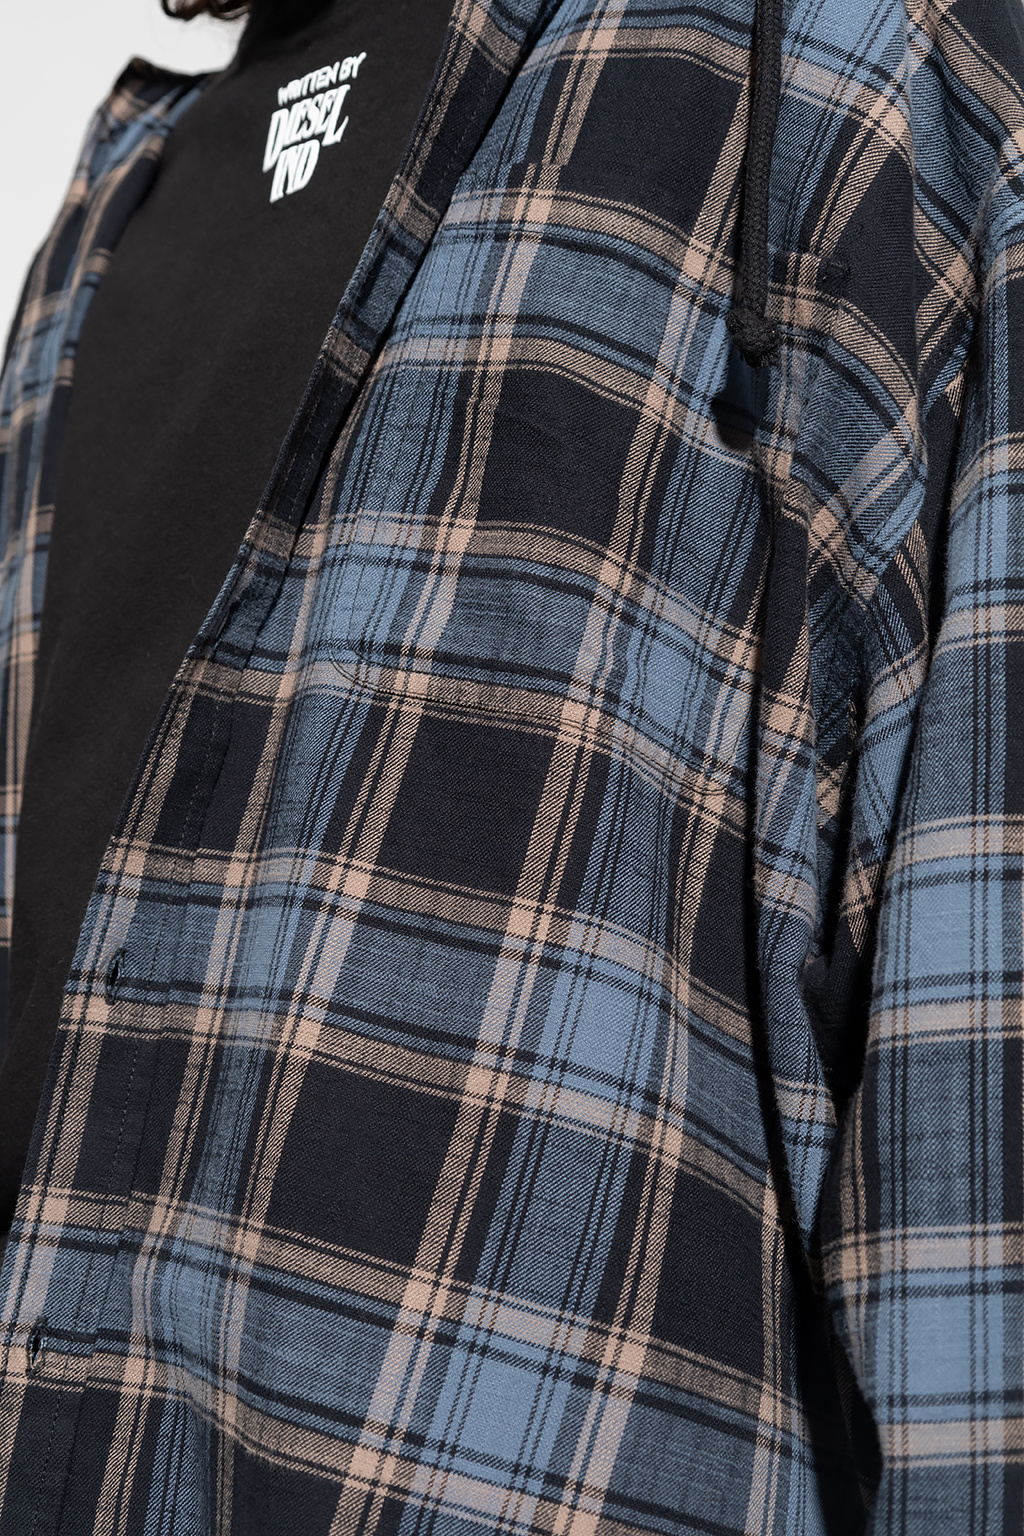 Diesel ‘S-DEWNY’ checked floral-print shirt